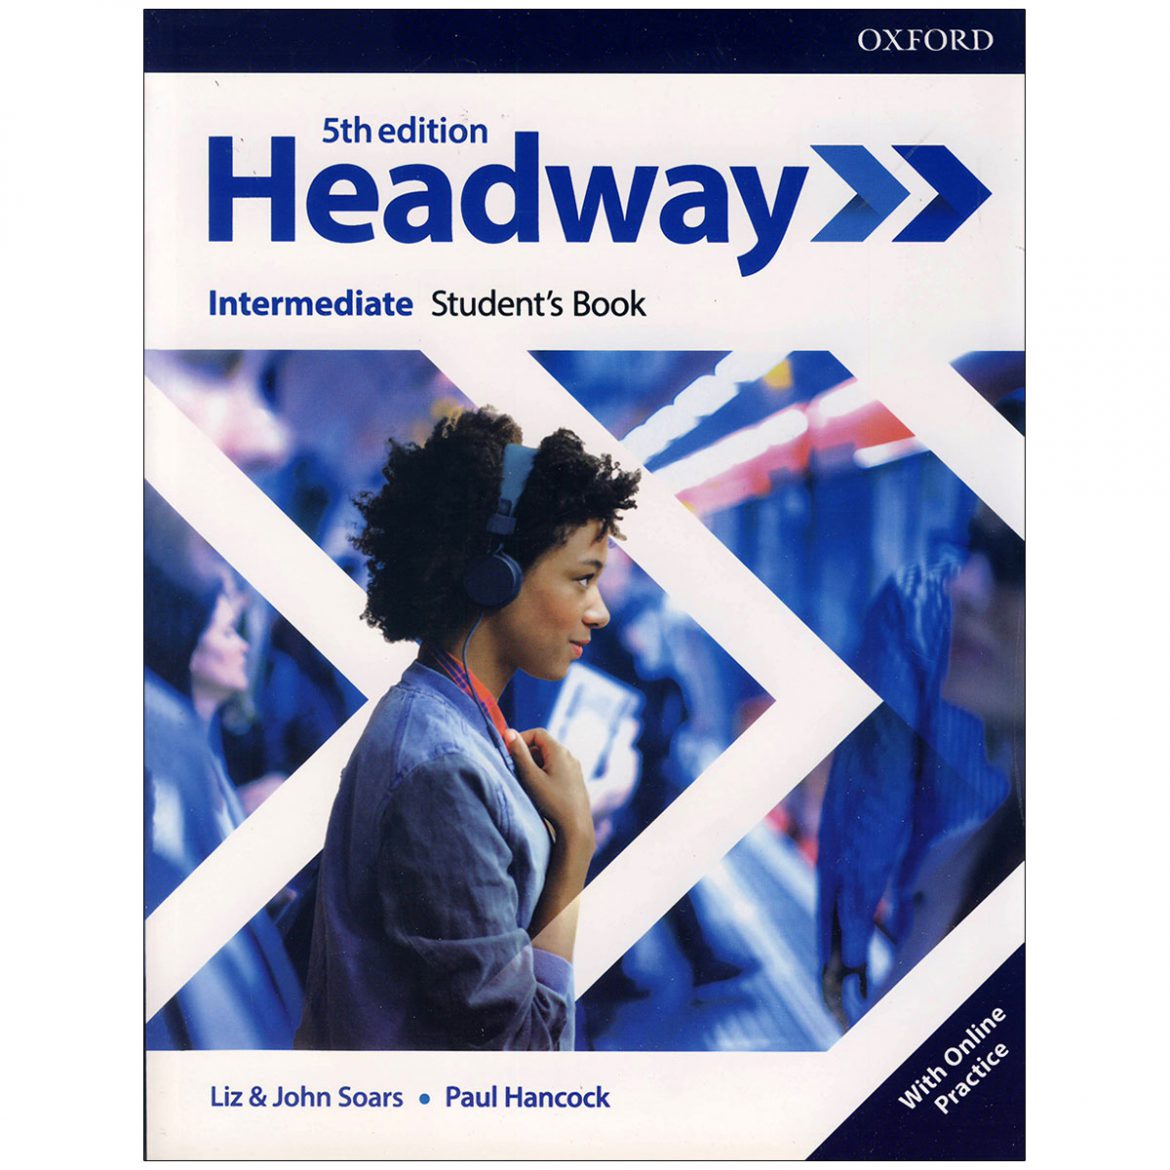 Headway intermediate student s book. Headway books 5th Edition. Headway 5th Edition students book. Headway 5 Workbook. Headway Intermediate student's book Fifth Edition.